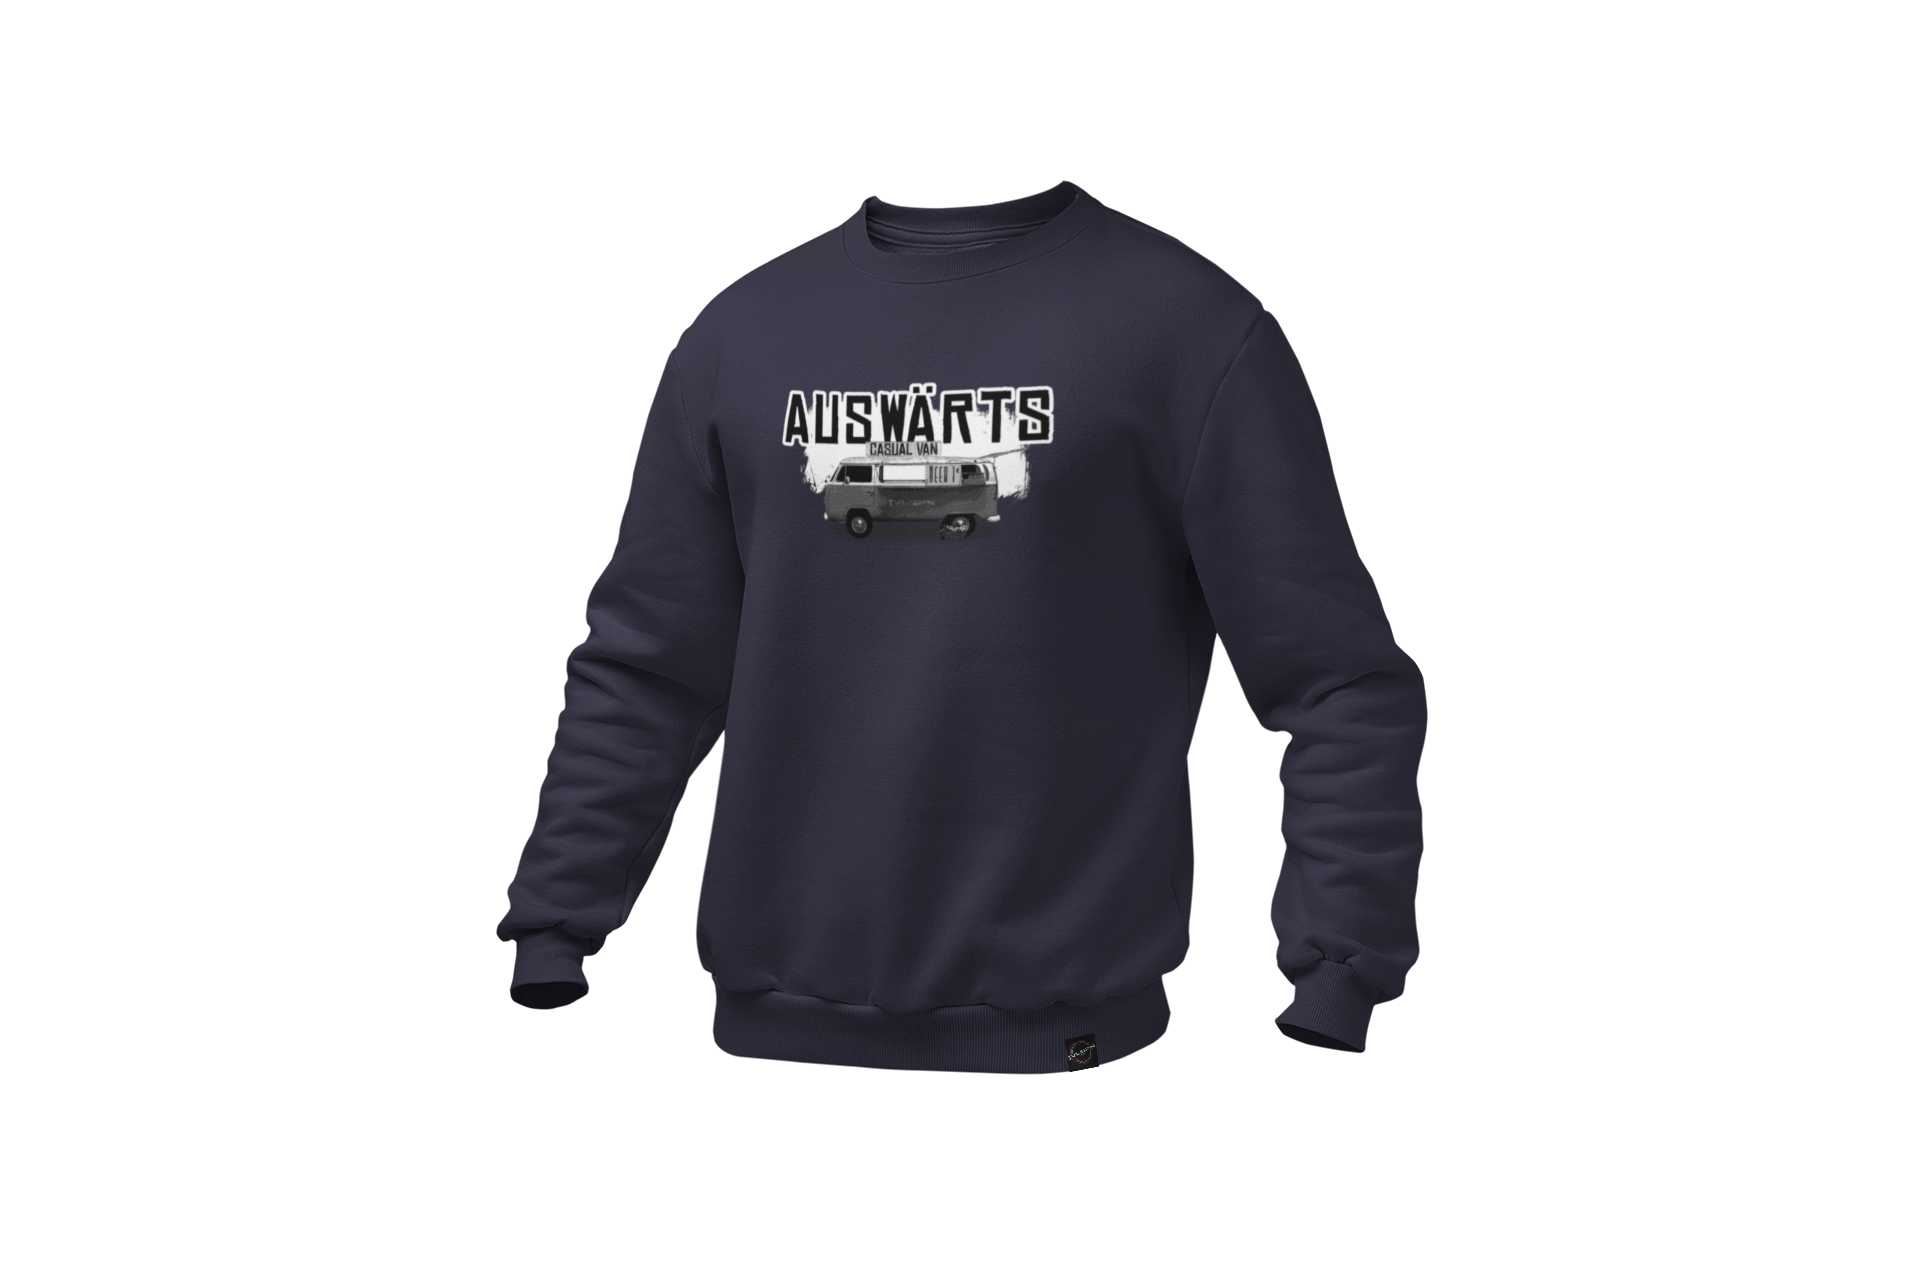 mockup-of-a-ghosted-crewneck-sweatshirt-over-a-solid-background-26960 (75).png